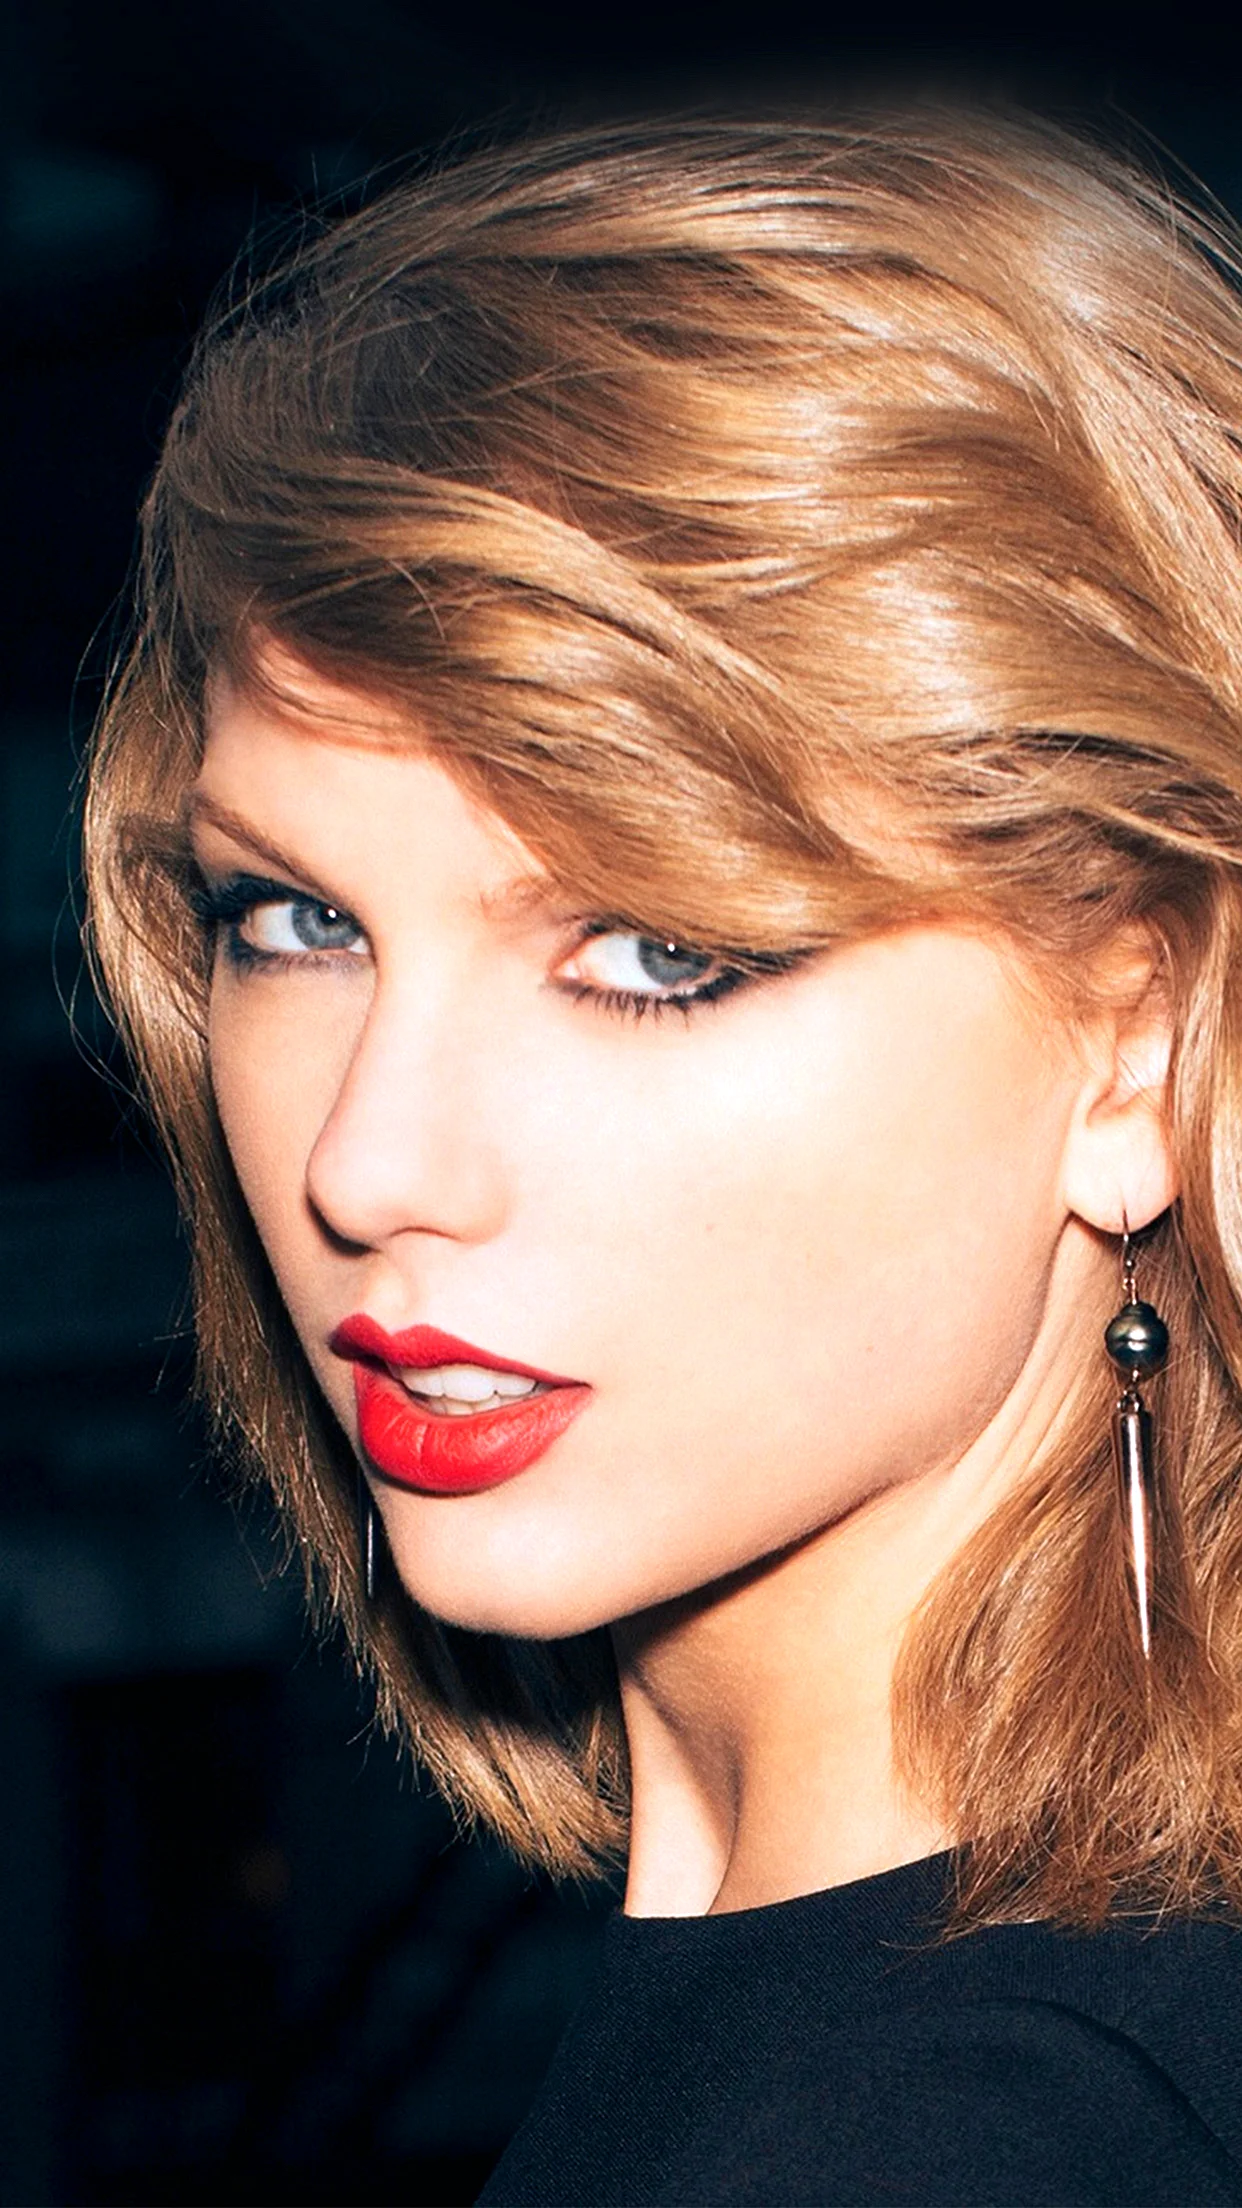 Taylor Swift Face Wallpaper For iPhone